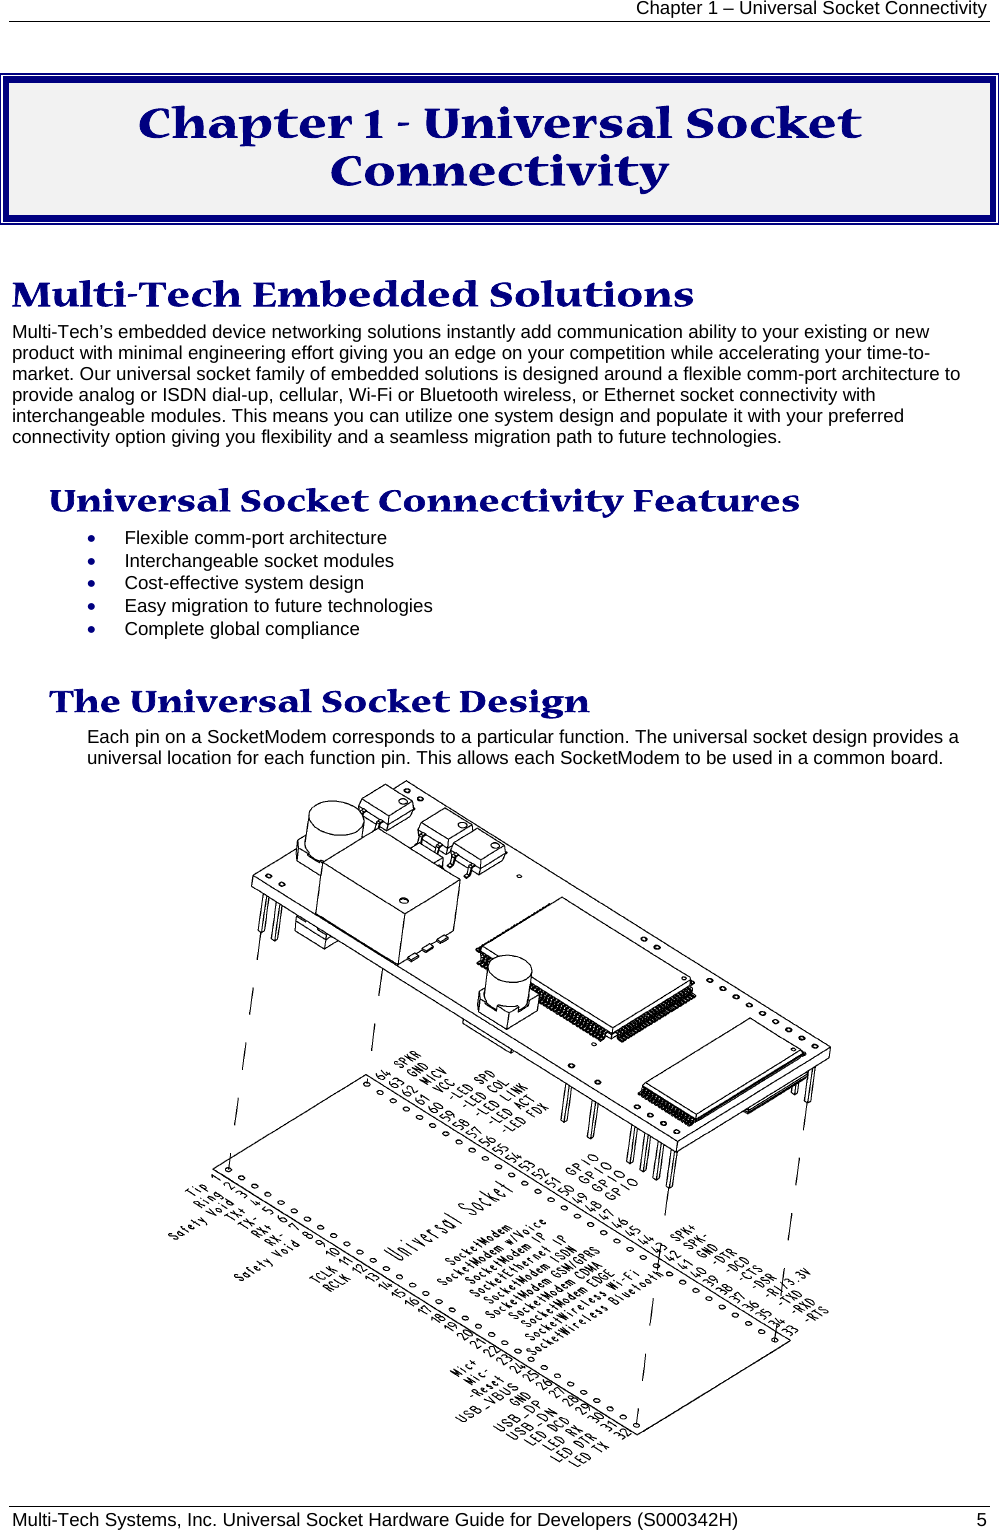 Chapter 1 – Universal Socket Connectivity Multi-Tech Systems, Inc. Universal Socket Hardware Guide for Developers (S000342H)  5  Chapter 1 - Universal Socket Connectivity  Multi-Tech Embedded Solutions Multi-Tech’s embedded device networking solutions instantly add communication ability to your existing or new product with minimal engineering effort giving you an edge on your competition while accelerating your time-to-market. Our universal socket family of embedded solutions is designed around a flexible comm-port architecture to provide analog or ISDN dial-up, cellular, Wi-Fi or Bluetooth wireless, or Ethernet socket connectivity with interchangeable modules. This means you can utilize one system design and populate it with your preferred connectivity option giving you flexibility and a seamless migration path to future technologies.  Universal Socket Connectivity Features • Flexible comm-port architecture  • Interchangeable socket modules • Cost-effective system design • Easy migration to future technologies • Complete global compliance  The Universal Socket Design  Each pin on a SocketModem corresponds to a particular function. The universal socket design provides a universal location for each function pin. This allows each SocketModem to be used in a common board.  